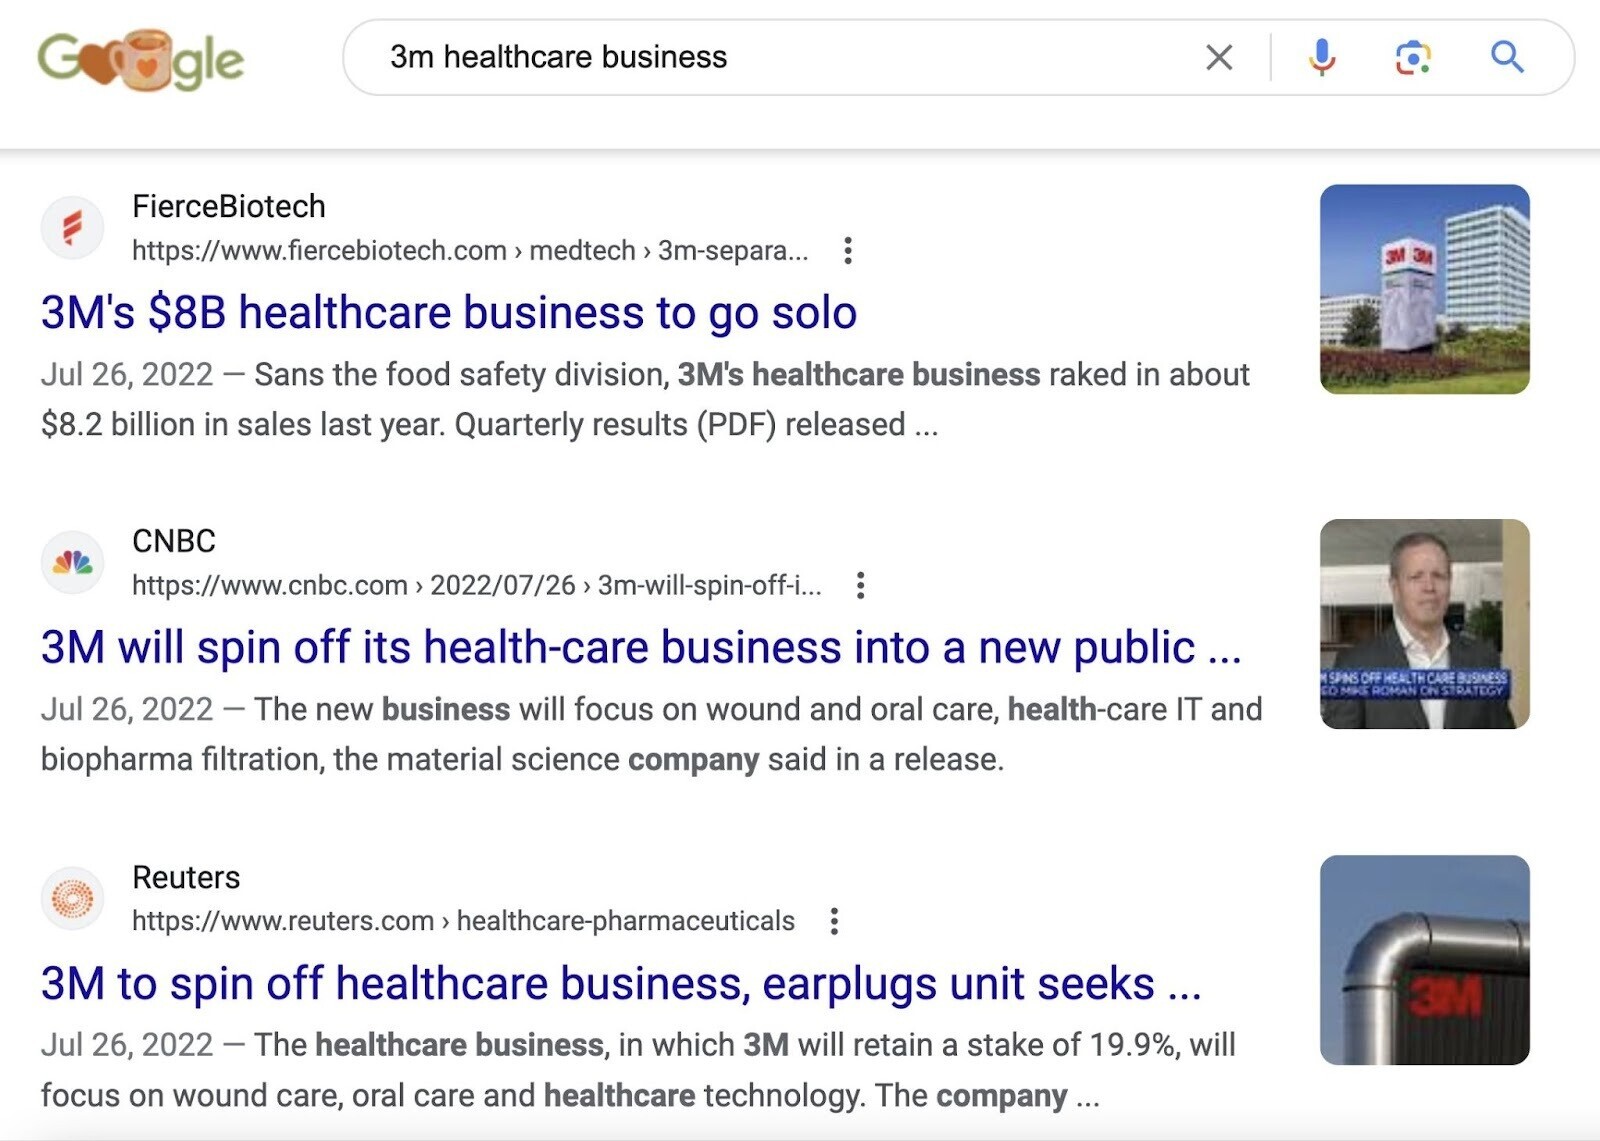 Google search results for "3m healthcare business"